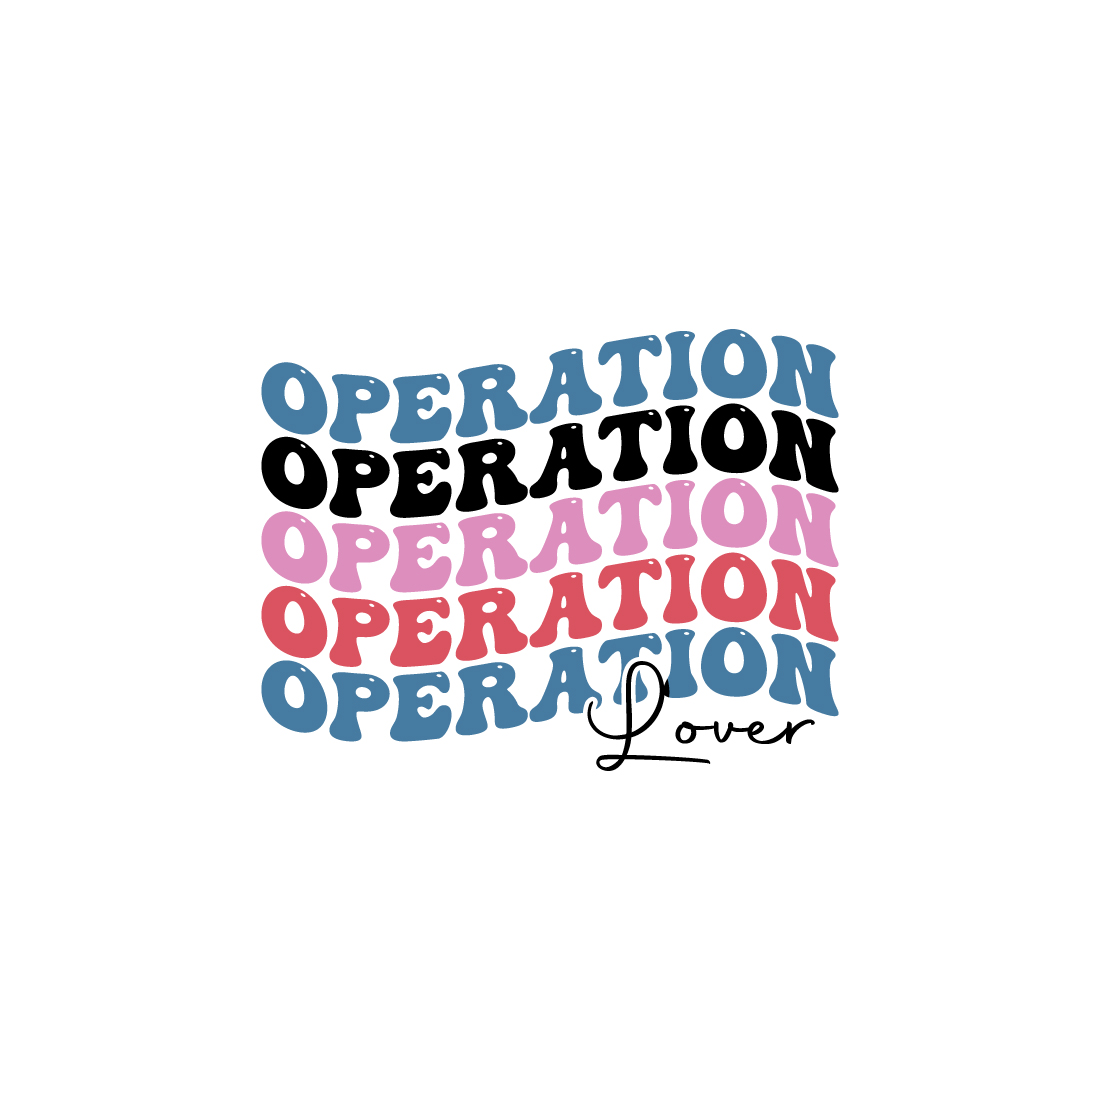 Operation lover indoor game retro typography design for t-shirts, cards, frame artwork, phone cases, bags, mugs, stickers, tumblers, print, etc preview image.